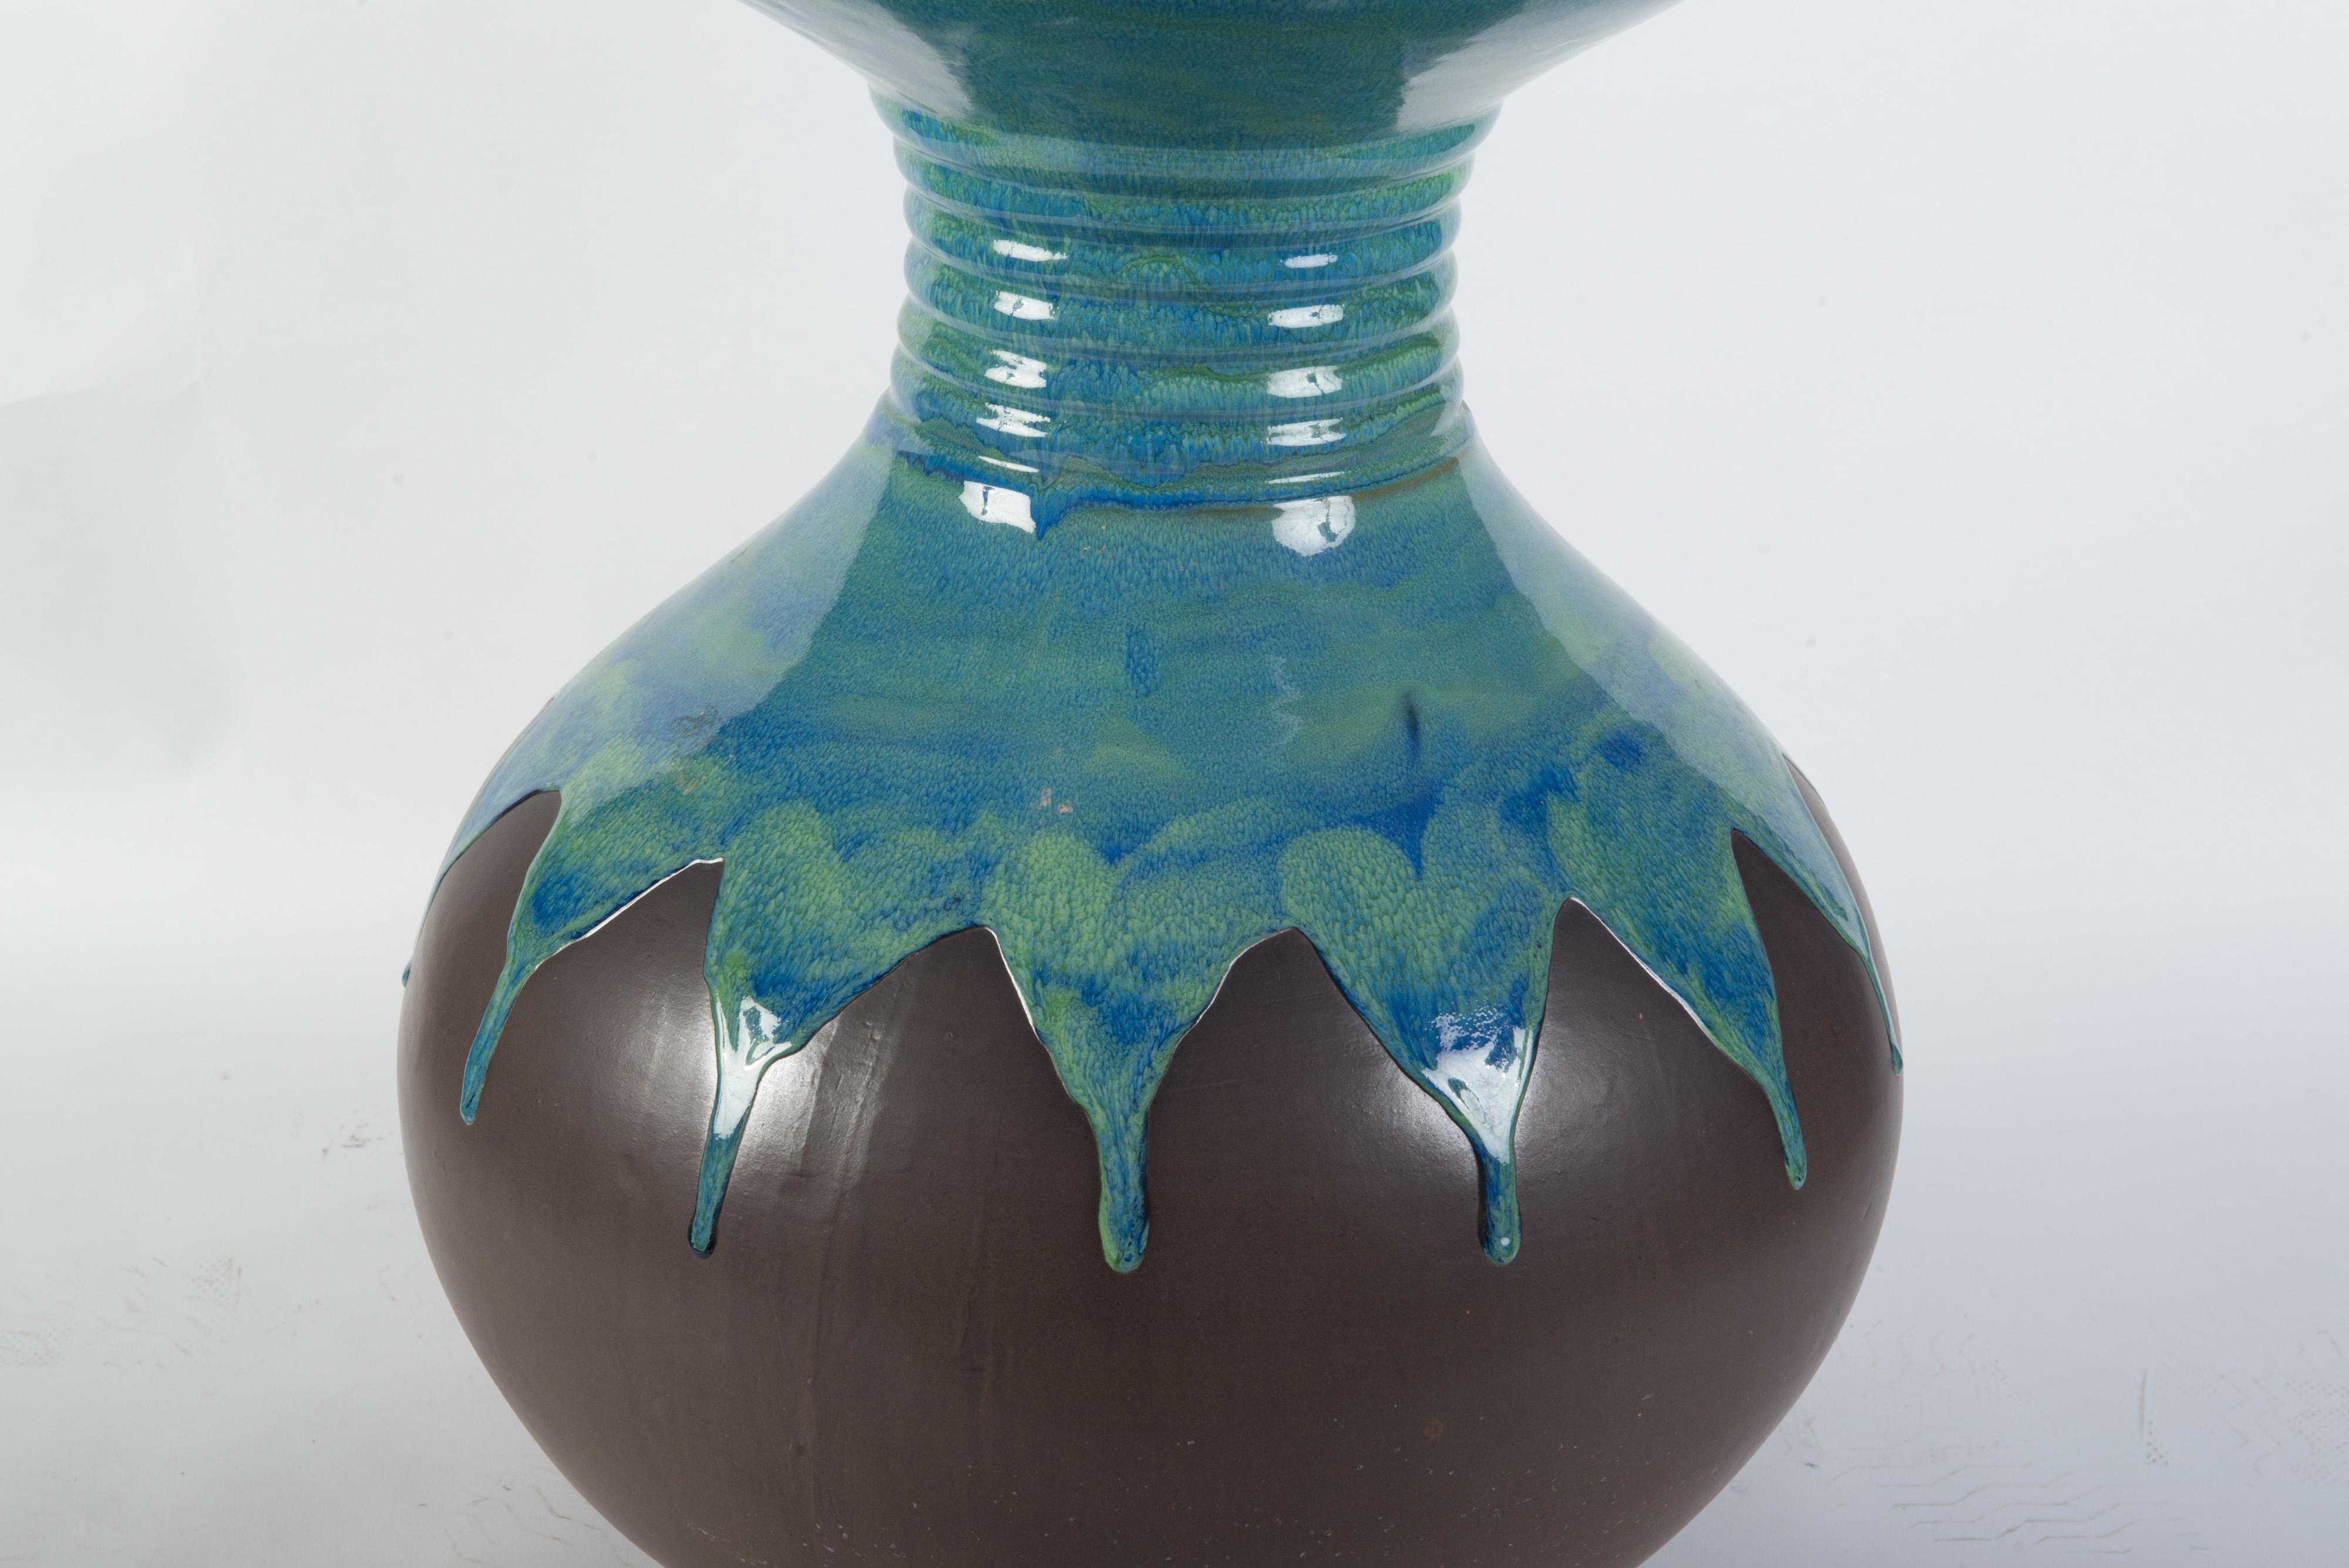 Large pottery vase with turquoise glaze and brown matte finish.